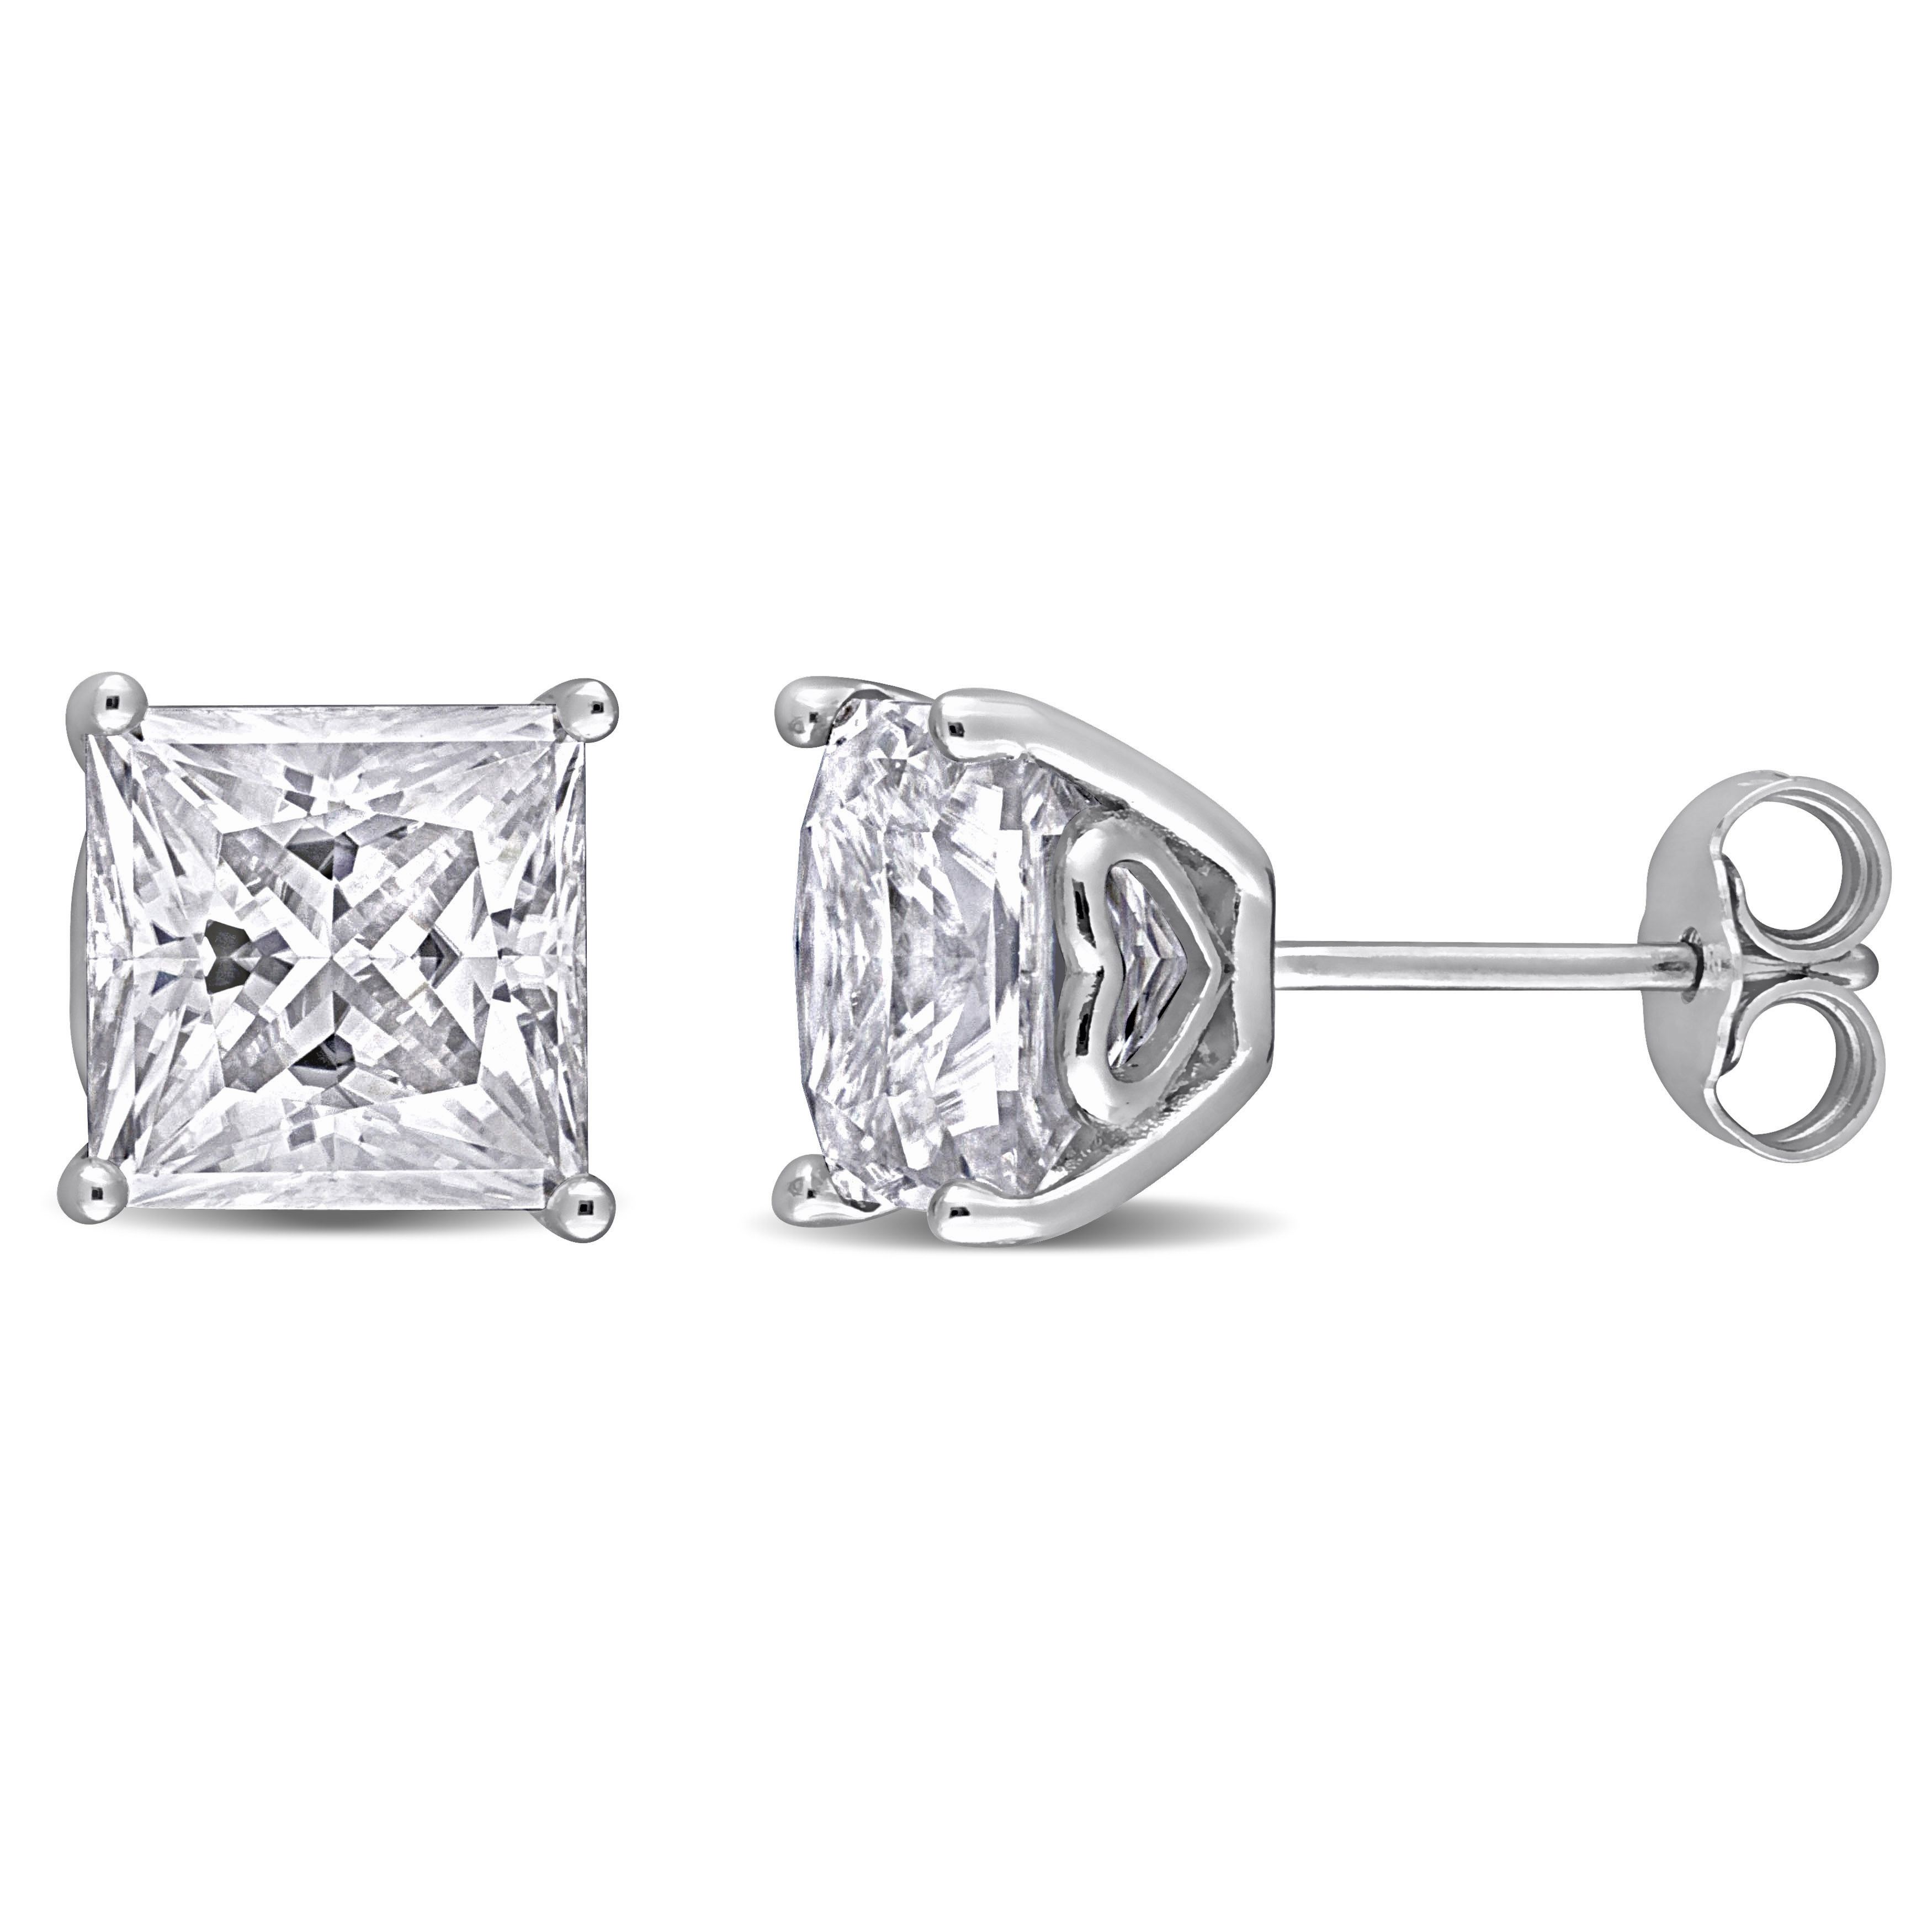 6 CT TGW Square Created Moissanite Stud Earrings in Sterling Silver